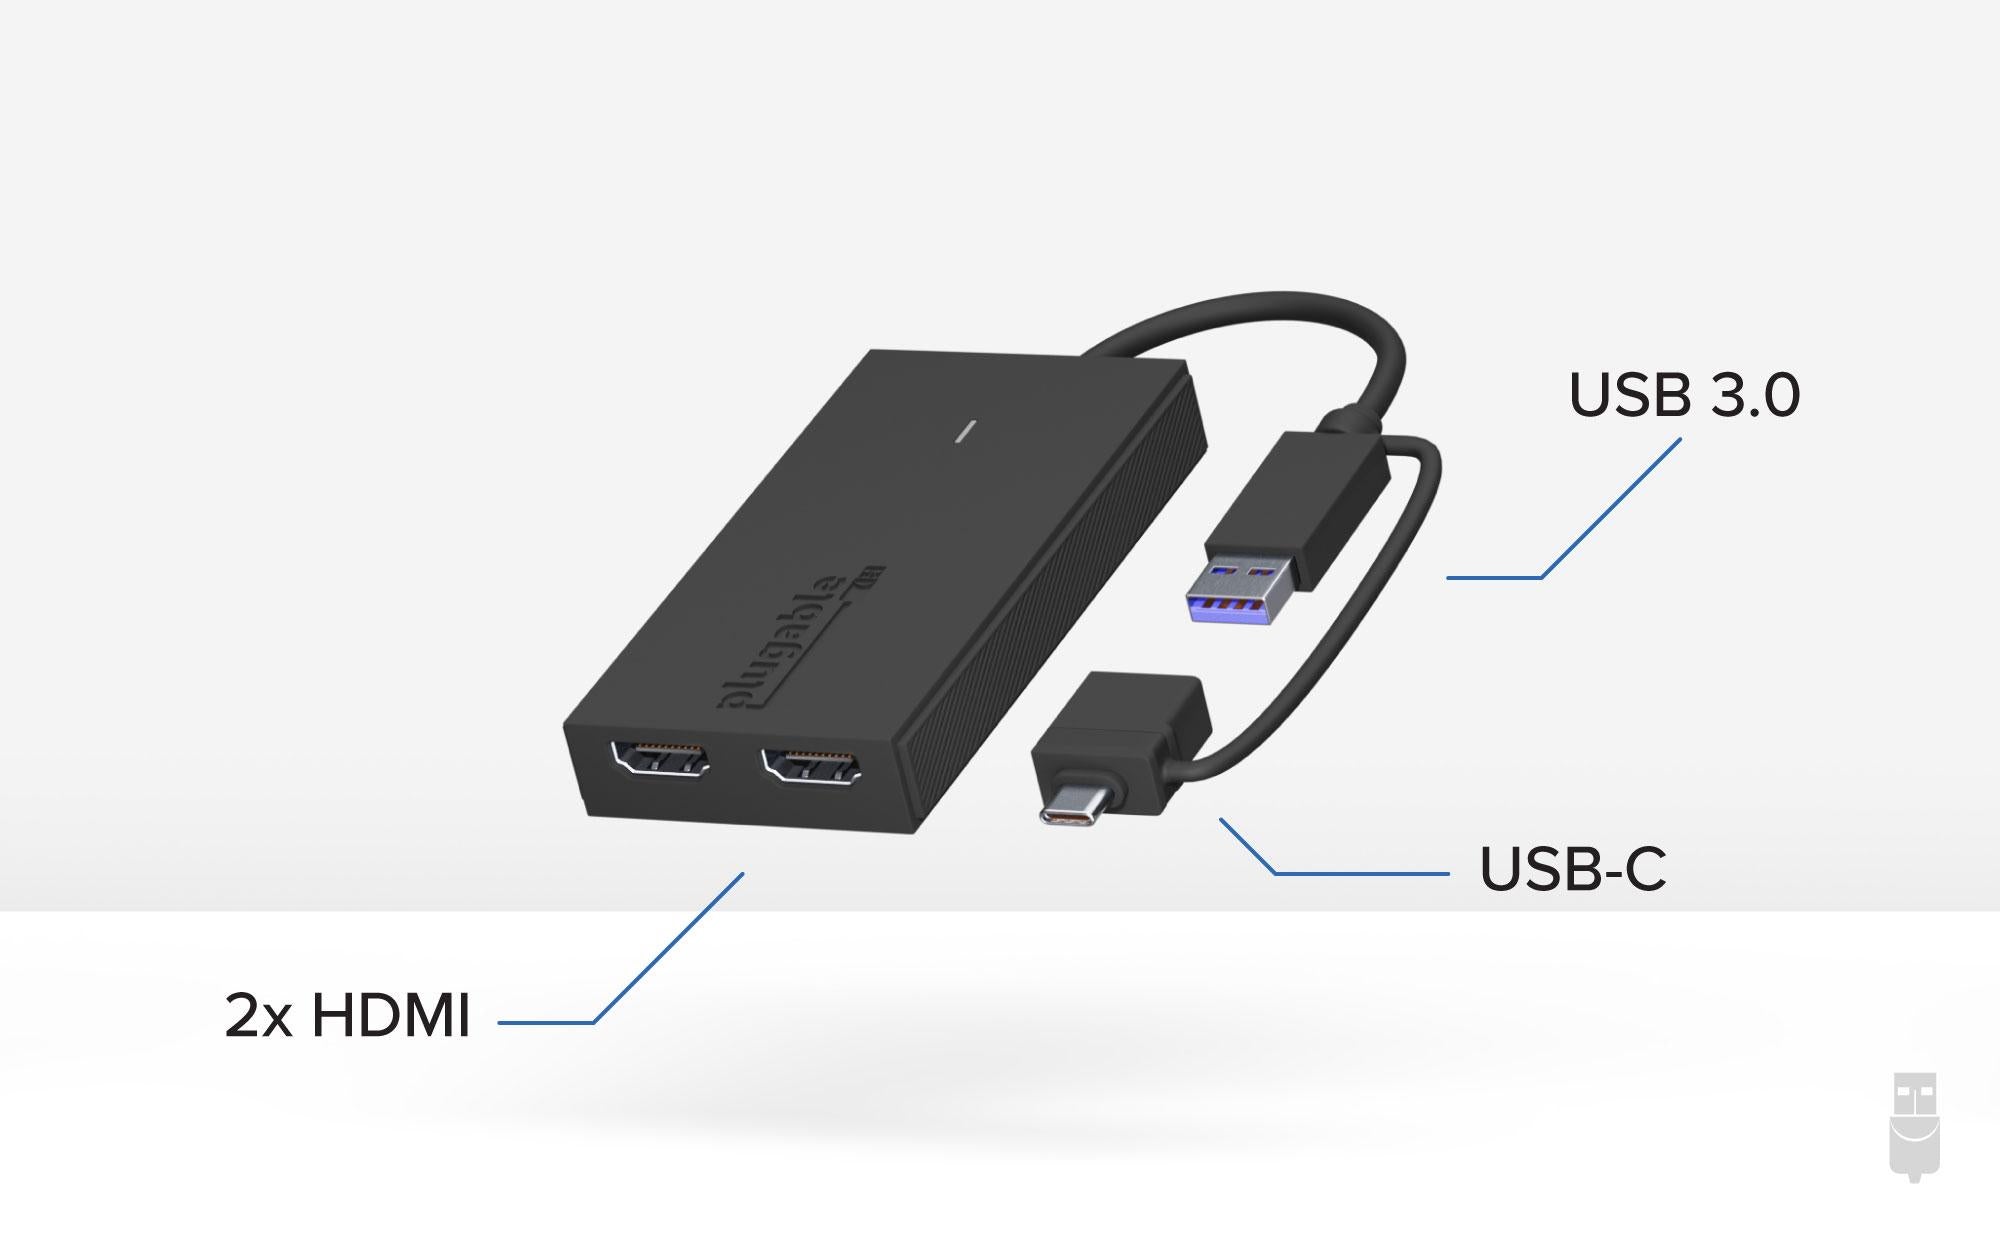 Plugable USB 3.0 or USB C to HDMI Adapter for Dual Monitors, Universal  Video Graphics Adapter for Mac and Windows, Thunderbolt, USB 3.0 or USB-C,  1080p@60Hz 